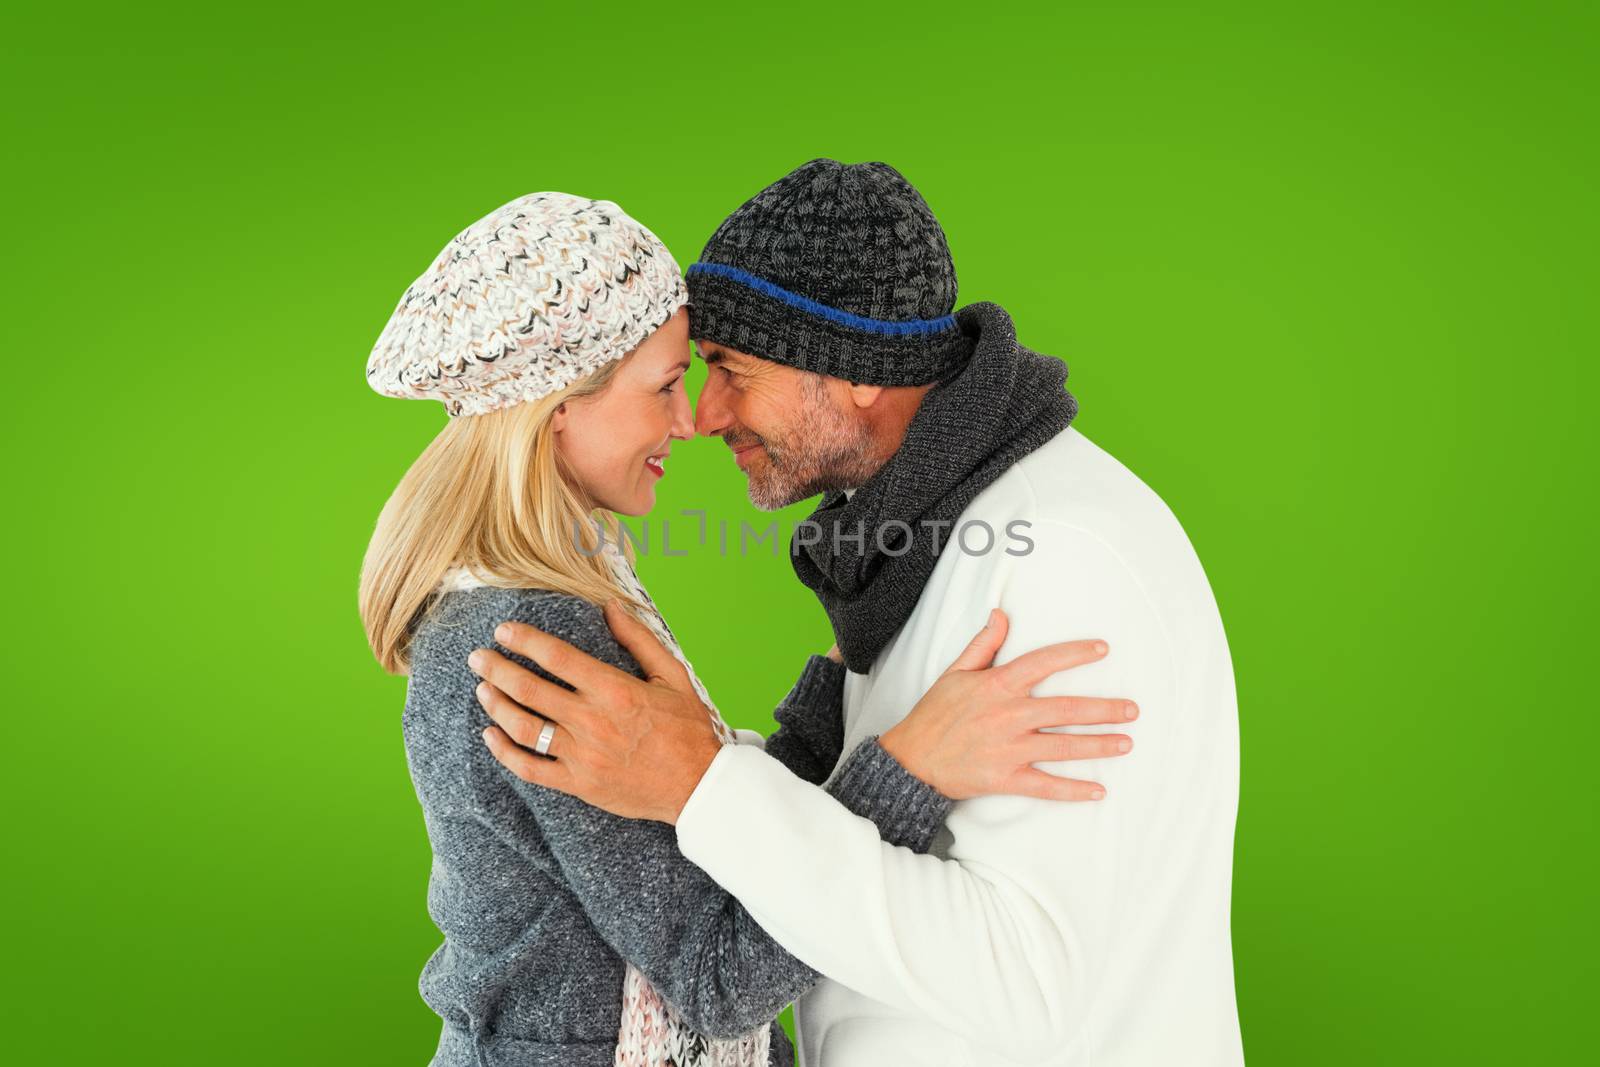 Happy couple in winter fashion embracing against green vignette